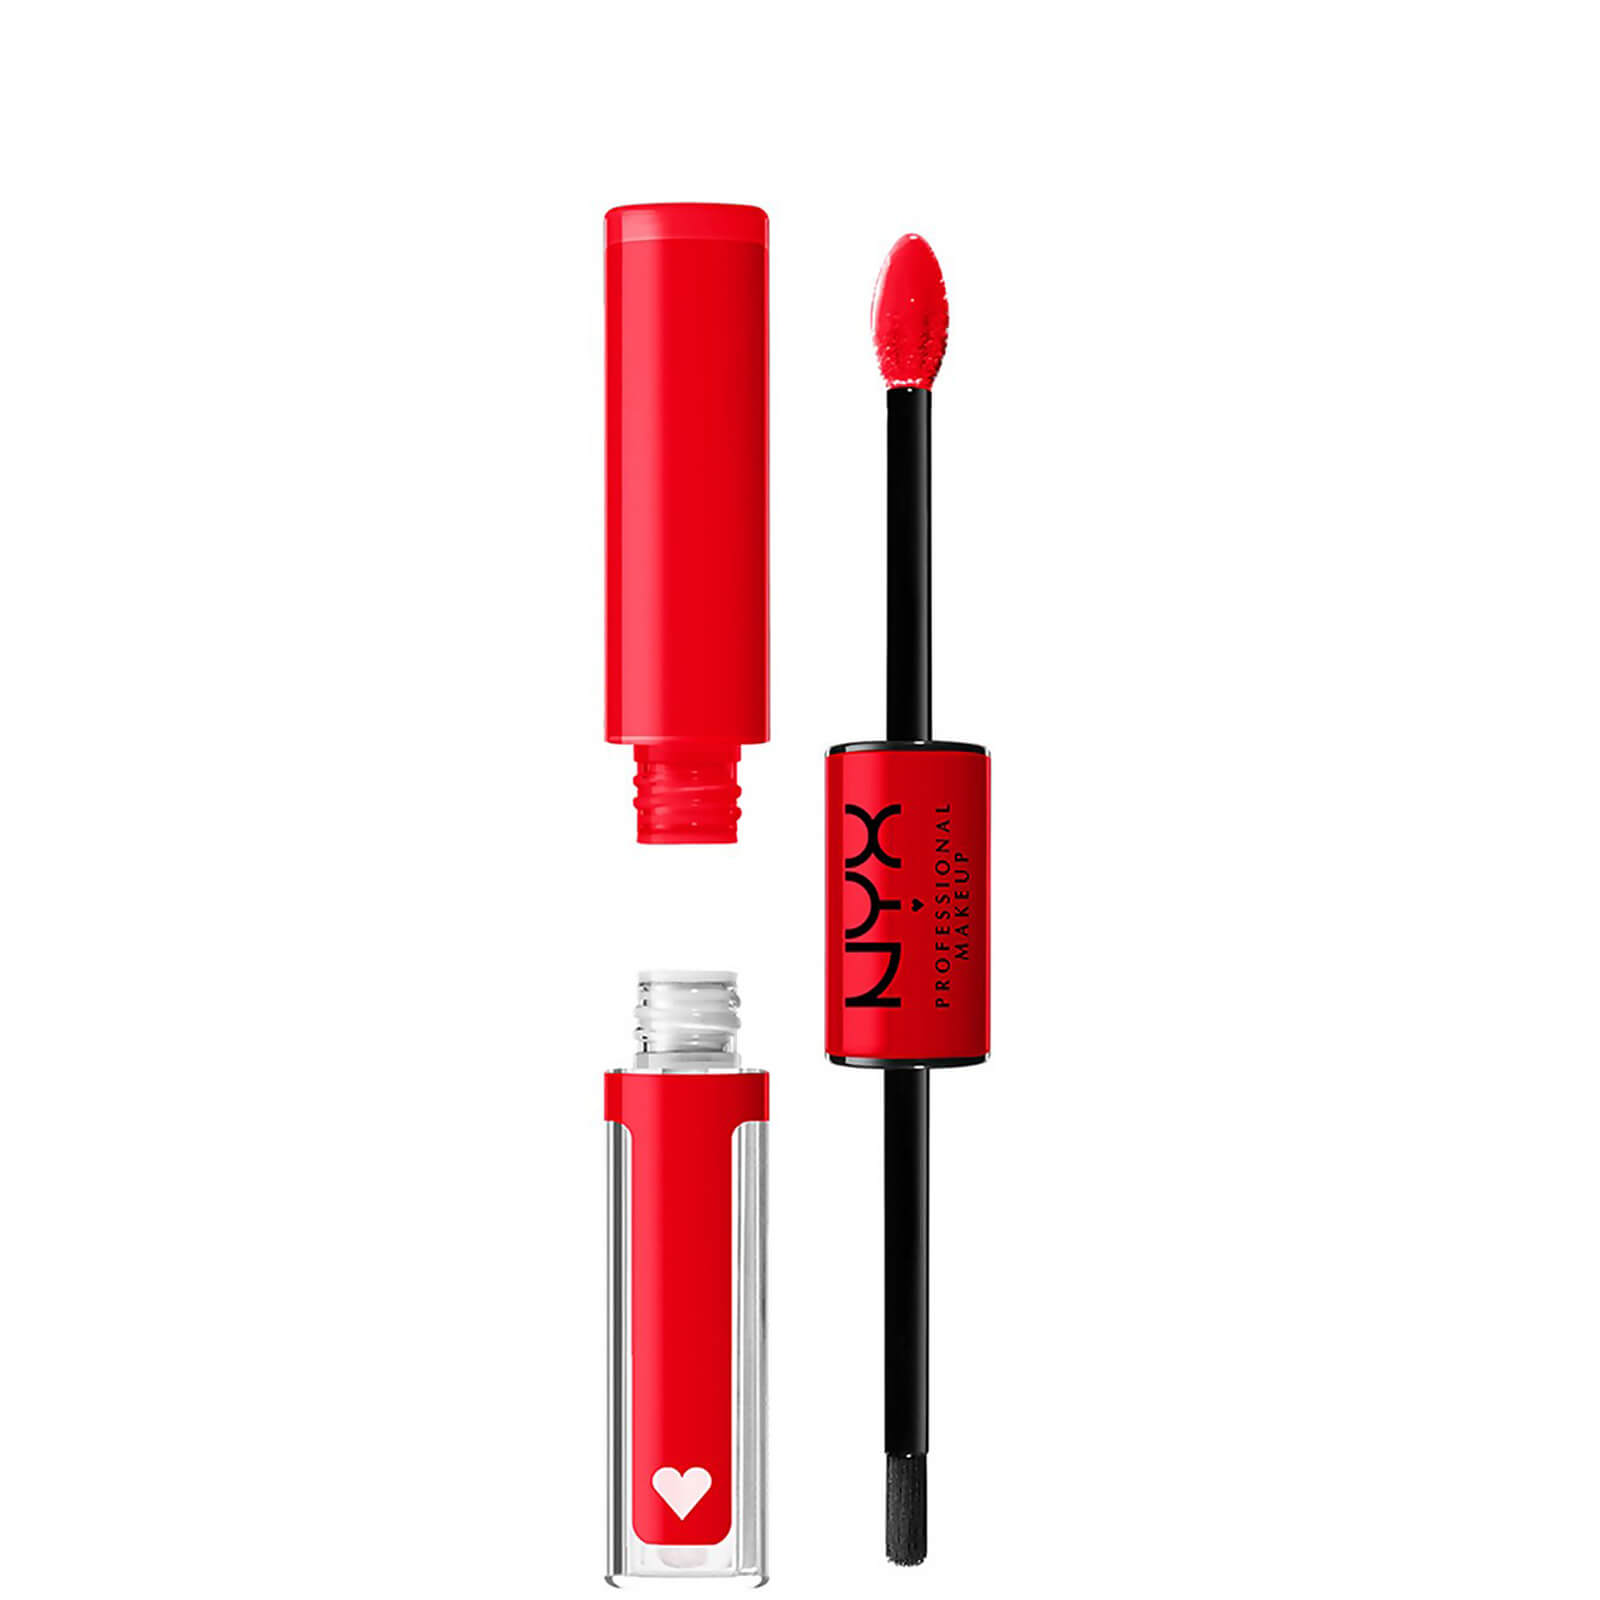 Image of NYX Professional Makeup Shine Loud High Shine Lip Gloss 8ml (Various Shades) - Rebel in Red